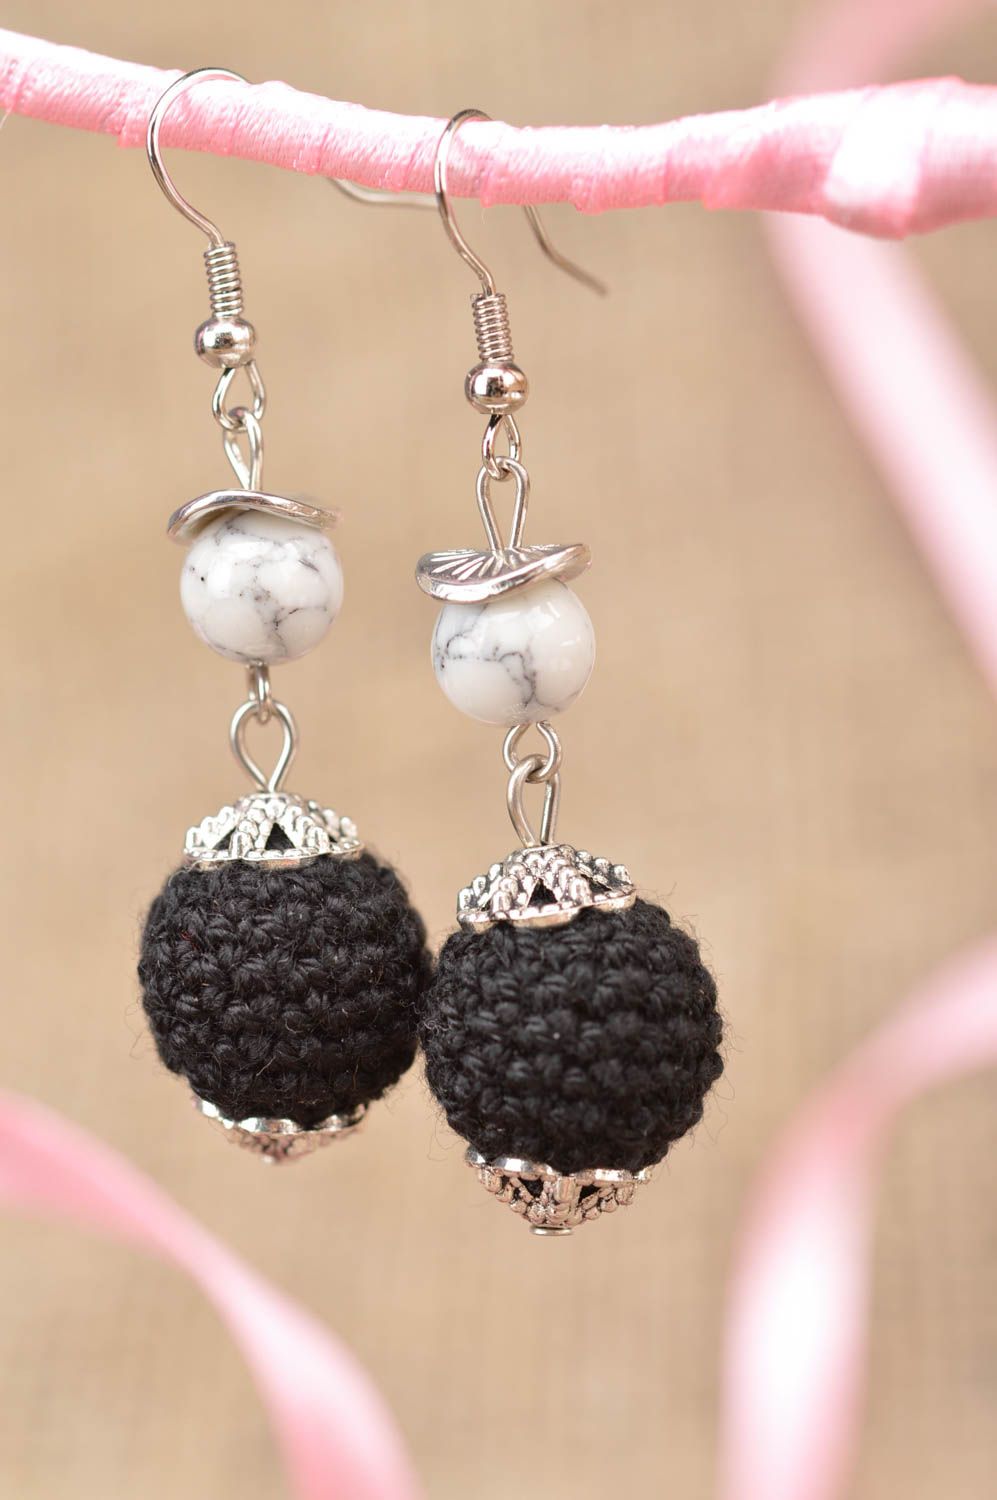 Unusual beautiful handmade earrings with crocheted over beads black and white photo 1